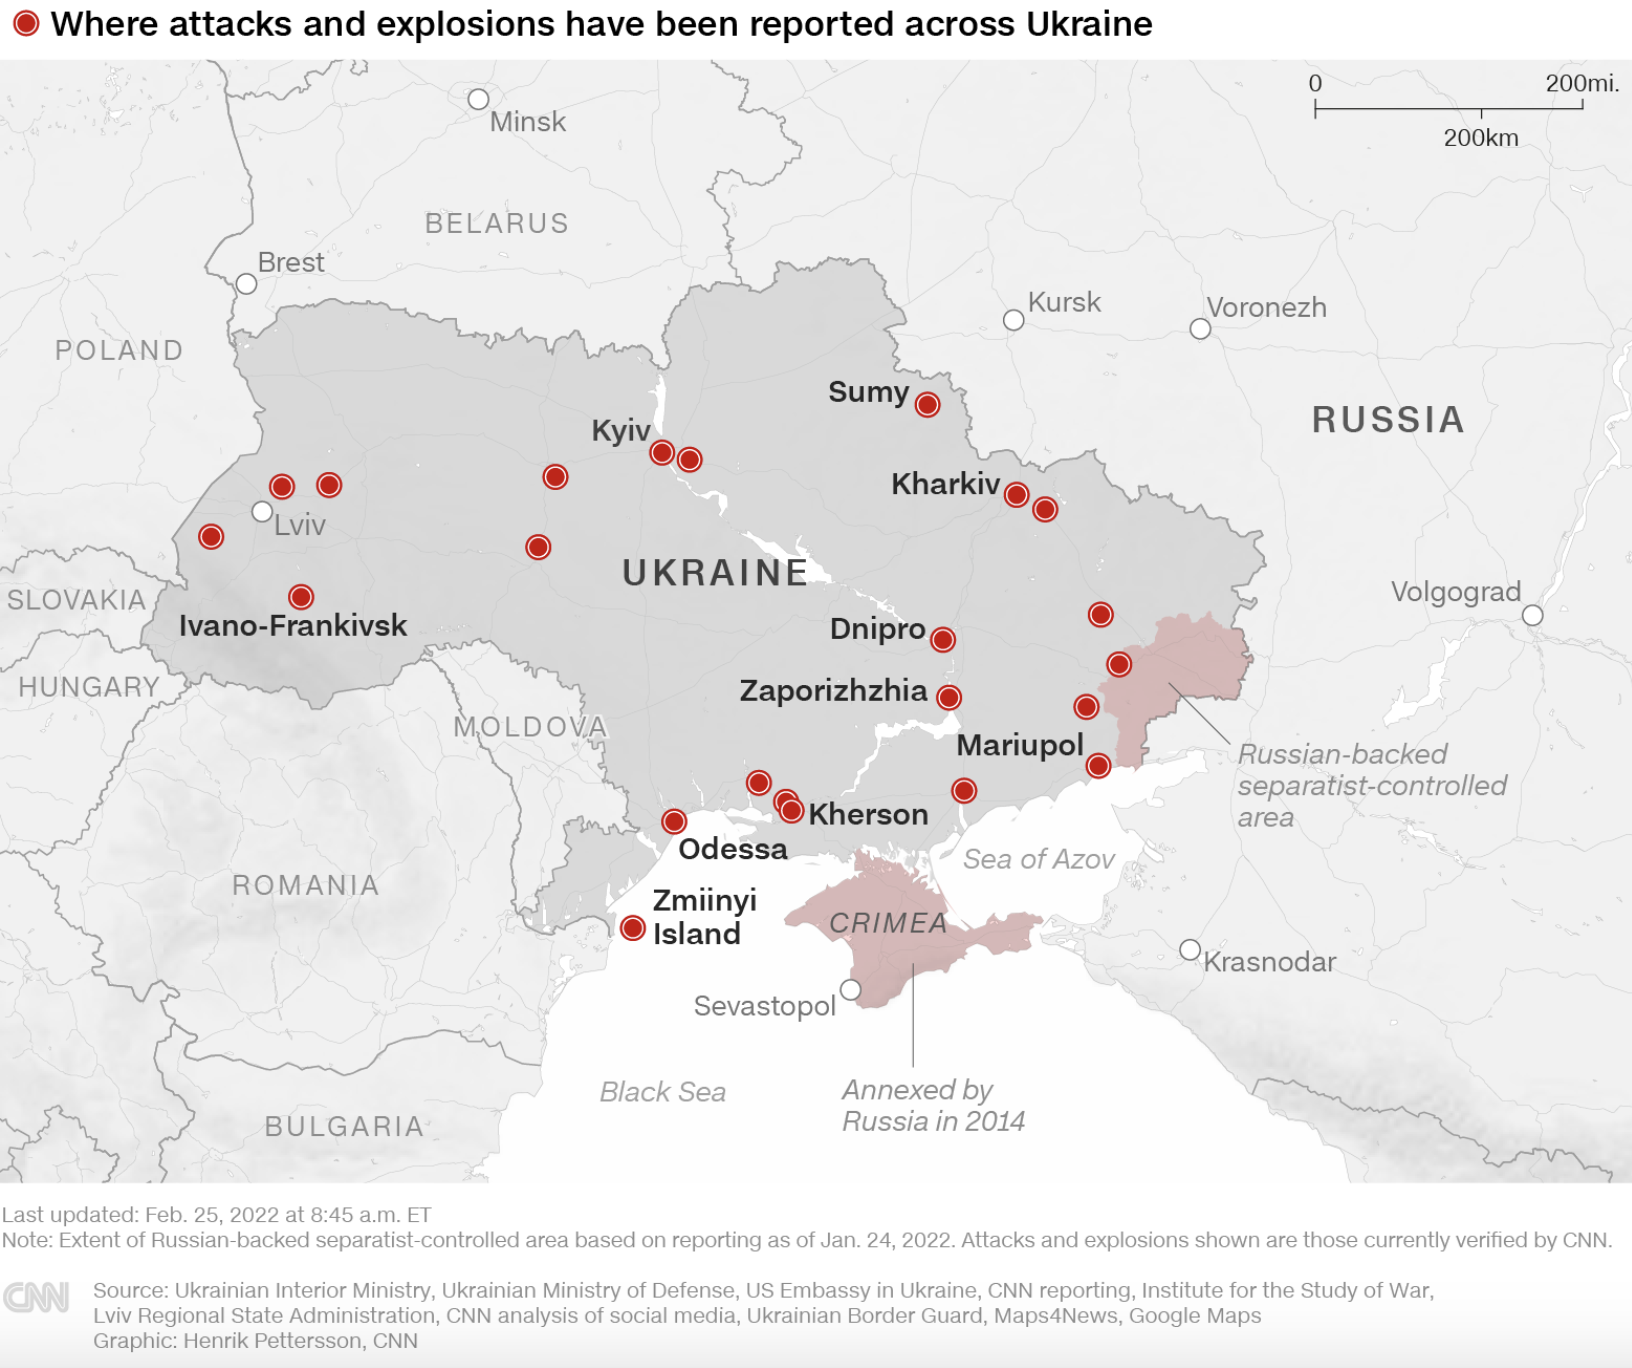 Here are the Ukrainian locations impacted by the Russian military assault